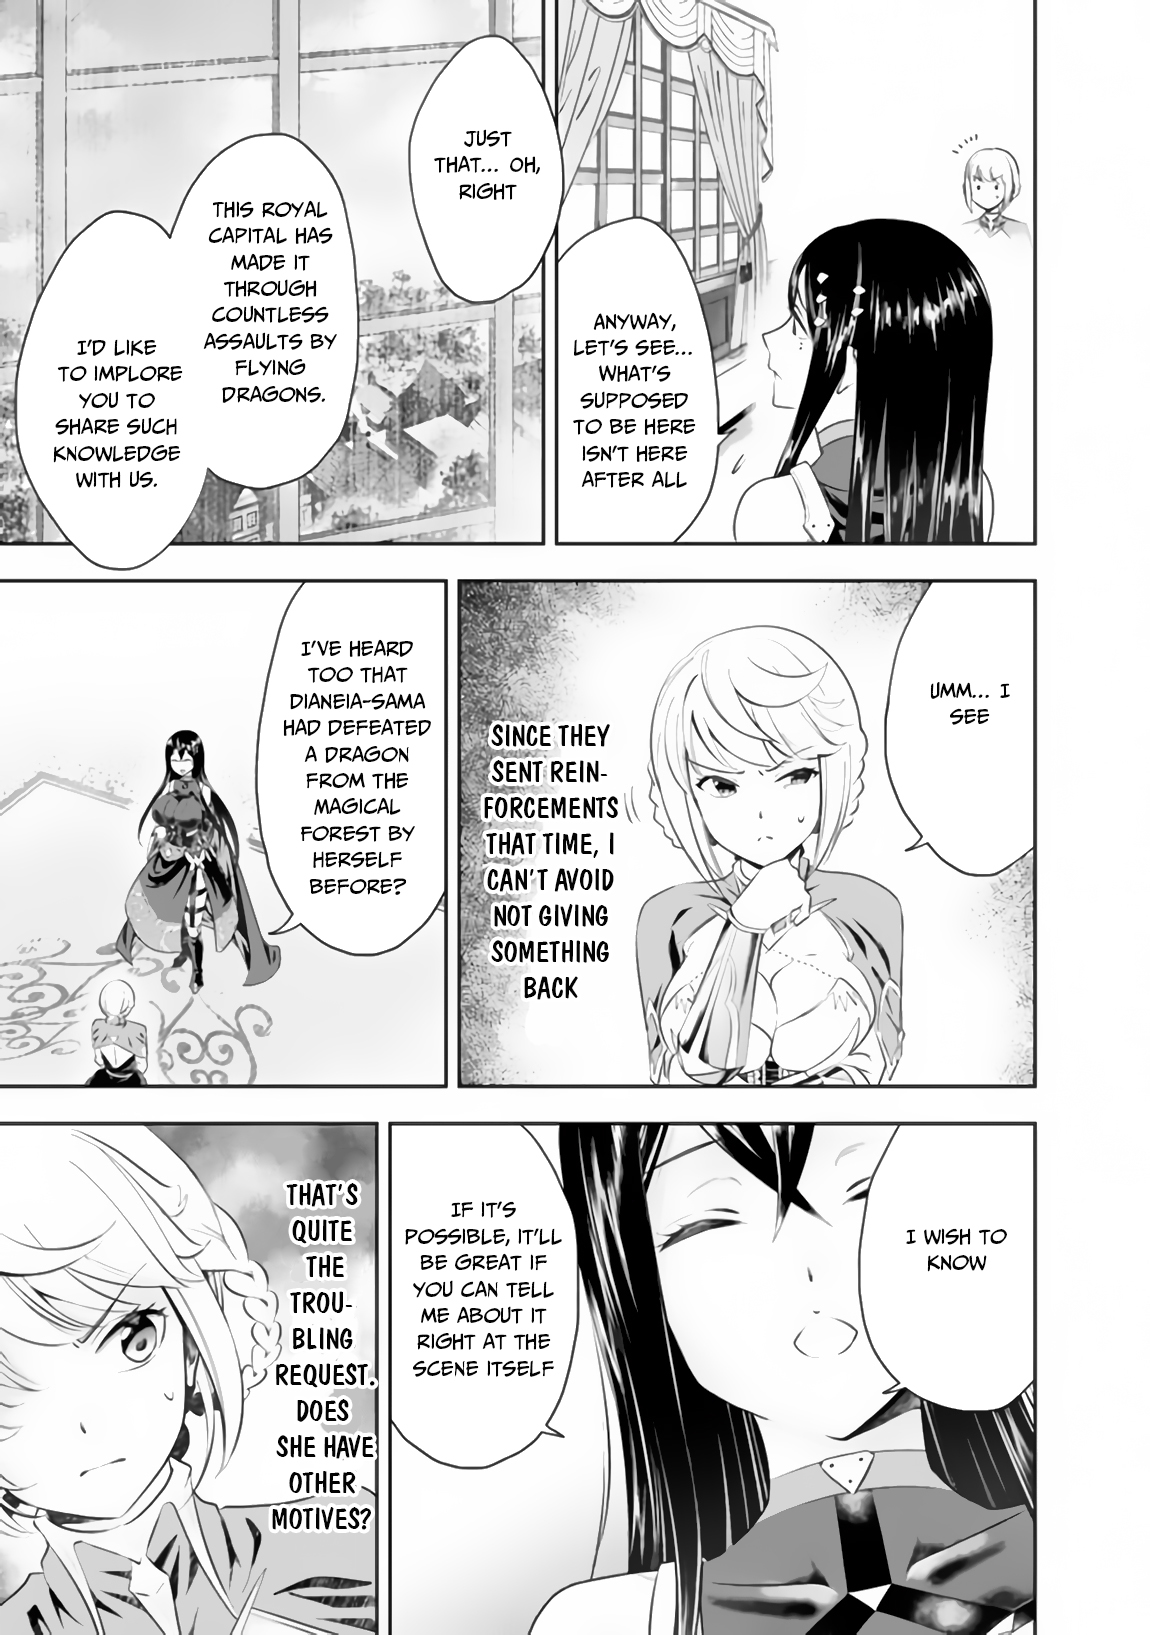 My House is a Magic Power Spot - Just by Living there I Become the Strongest in the World Ch.37